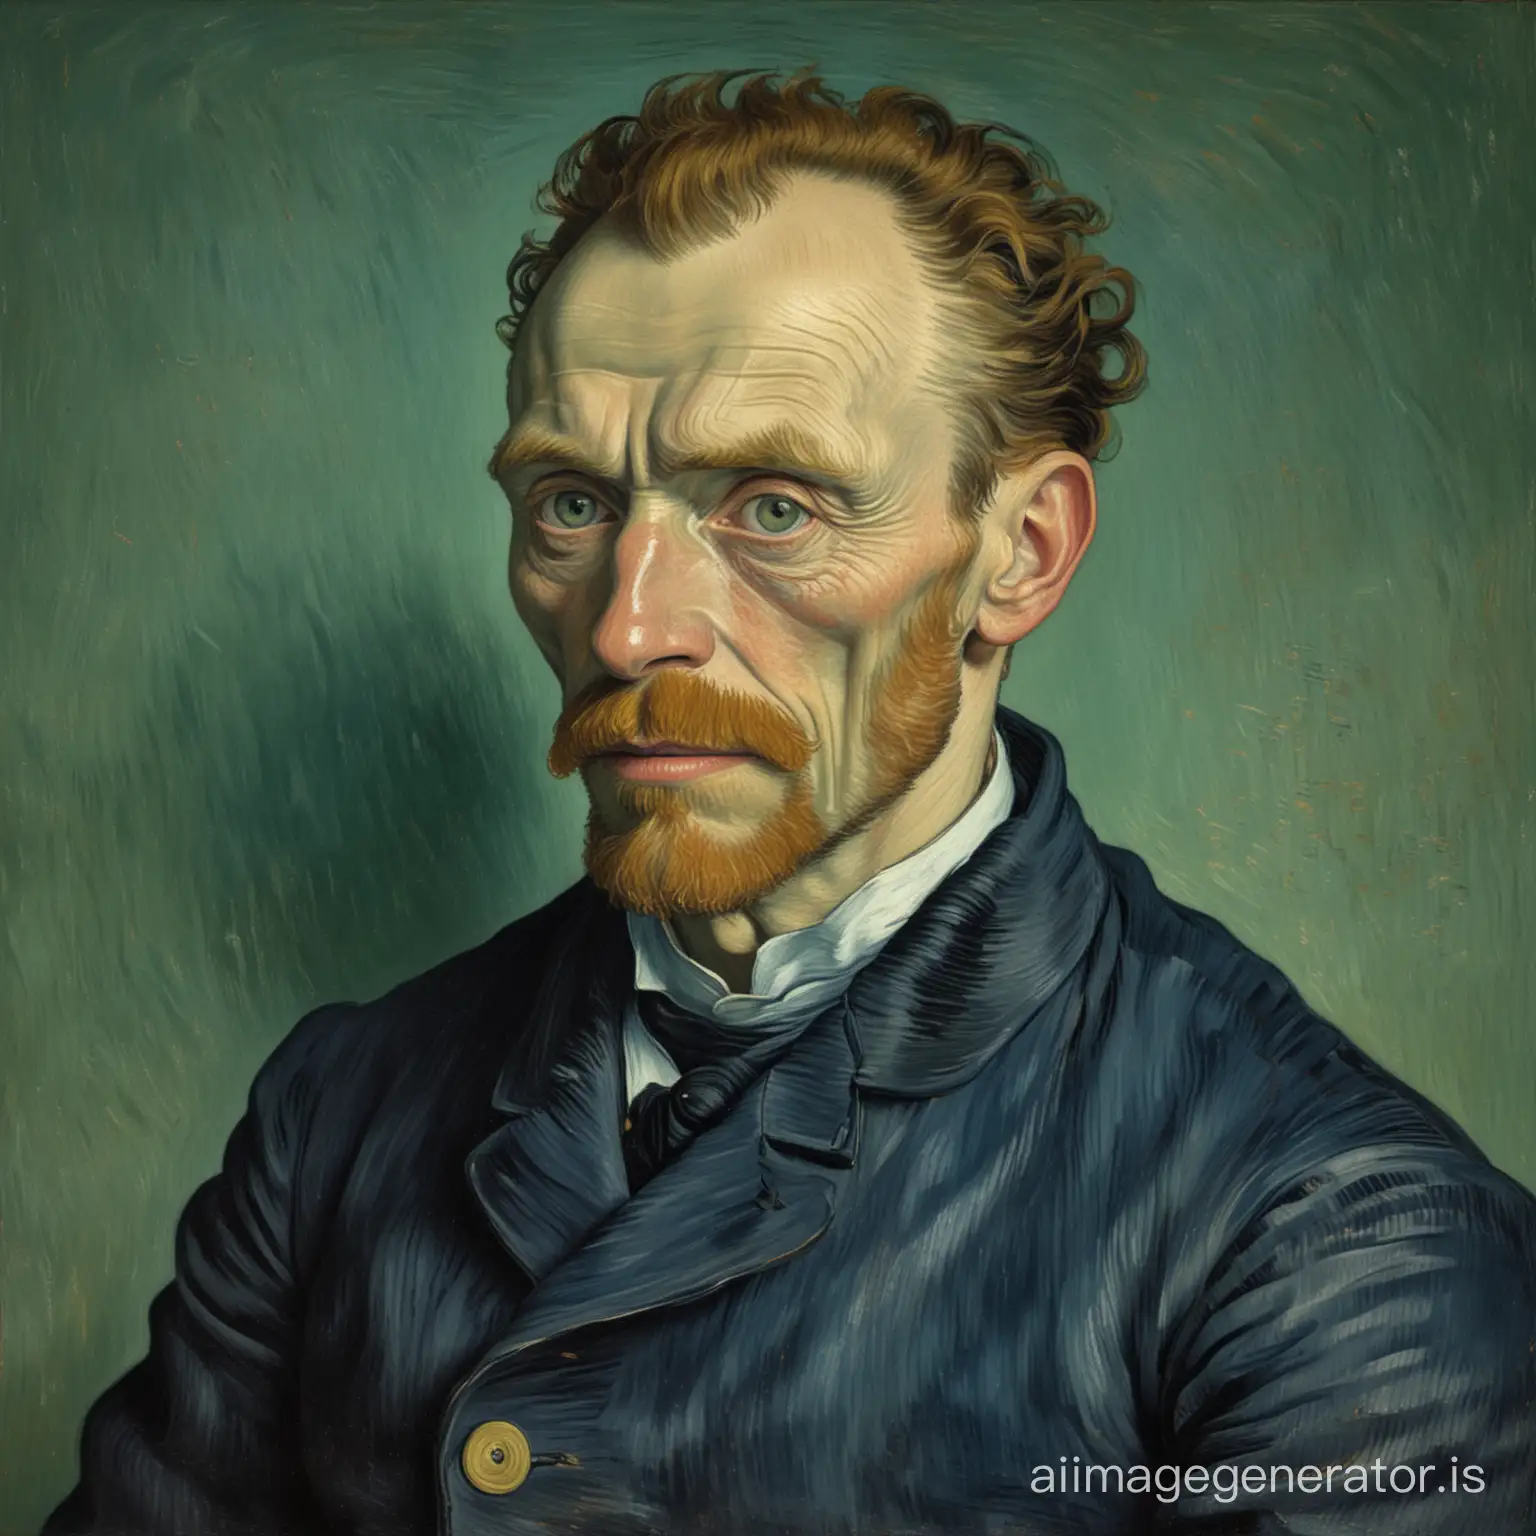 The "Portrait of Dr. Gachet" was painted by Van Gogh in 1890, just a few months before his death. It depicts Dr. Paul Gachet, who cared for Van Gogh during the final months of his life.